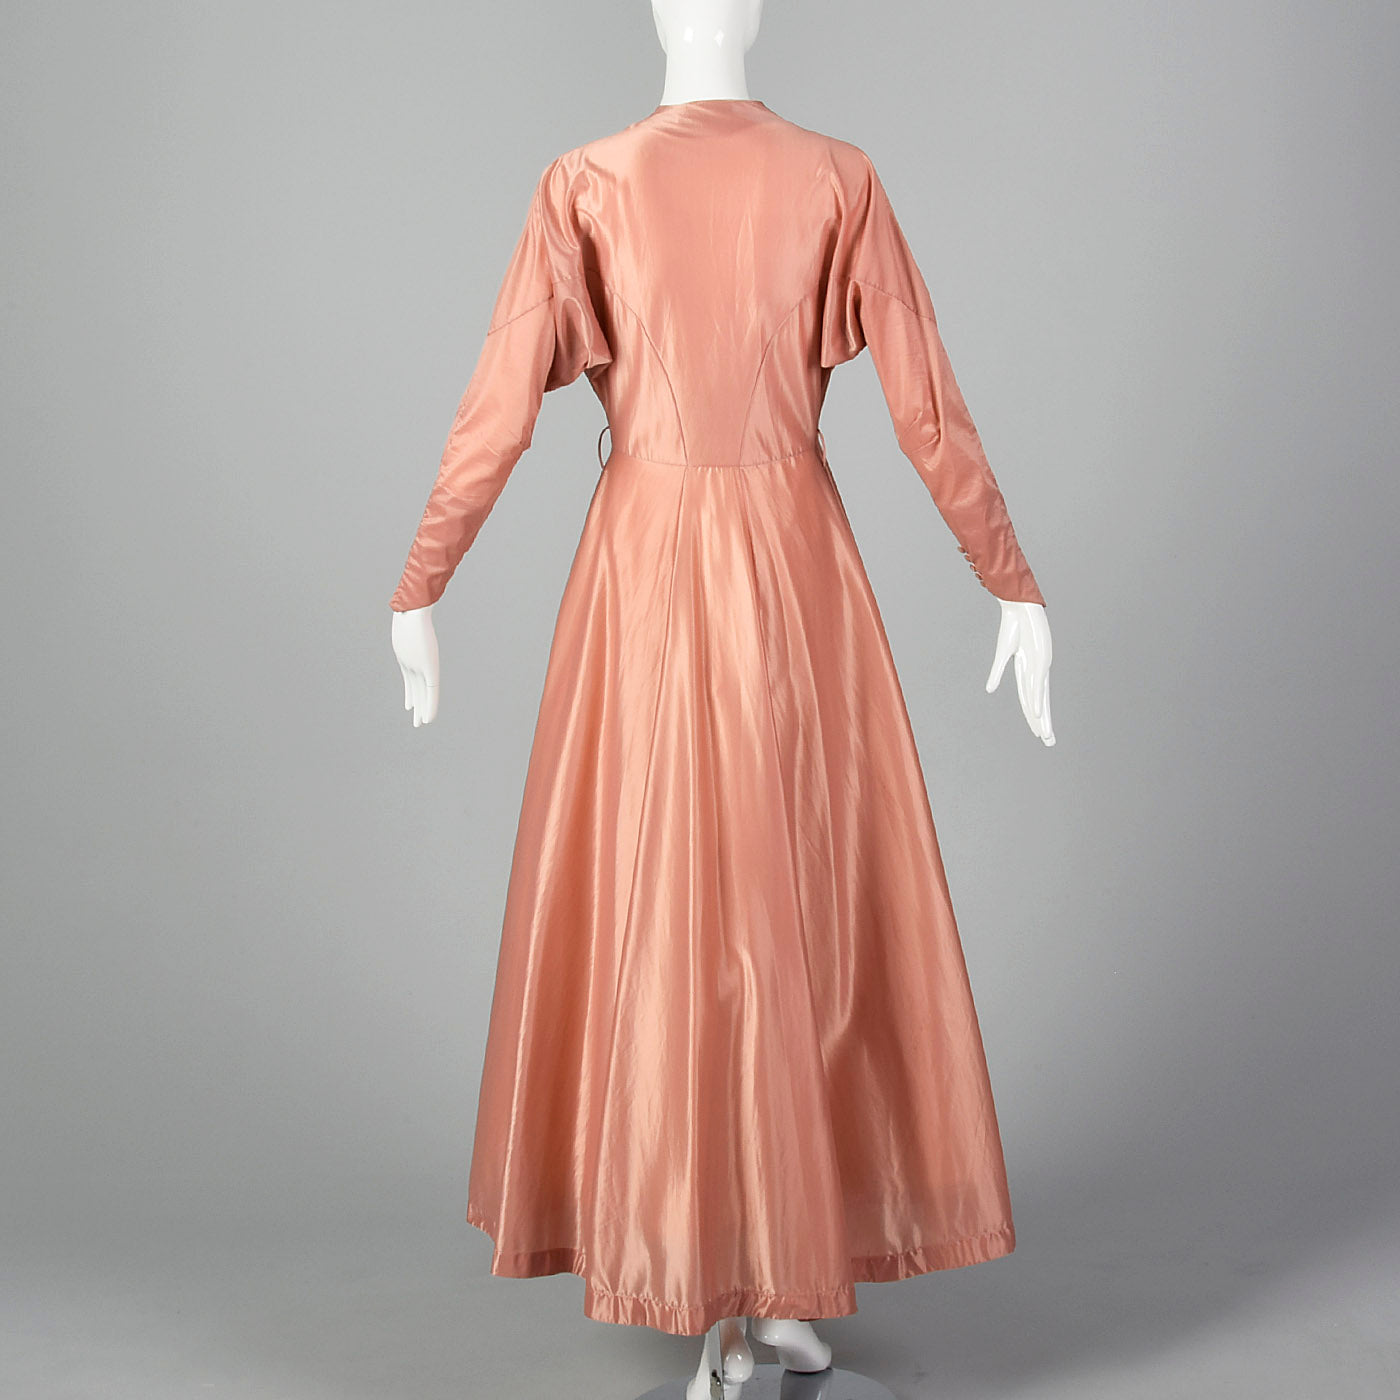 Discover more than 272 1930s dressing gown